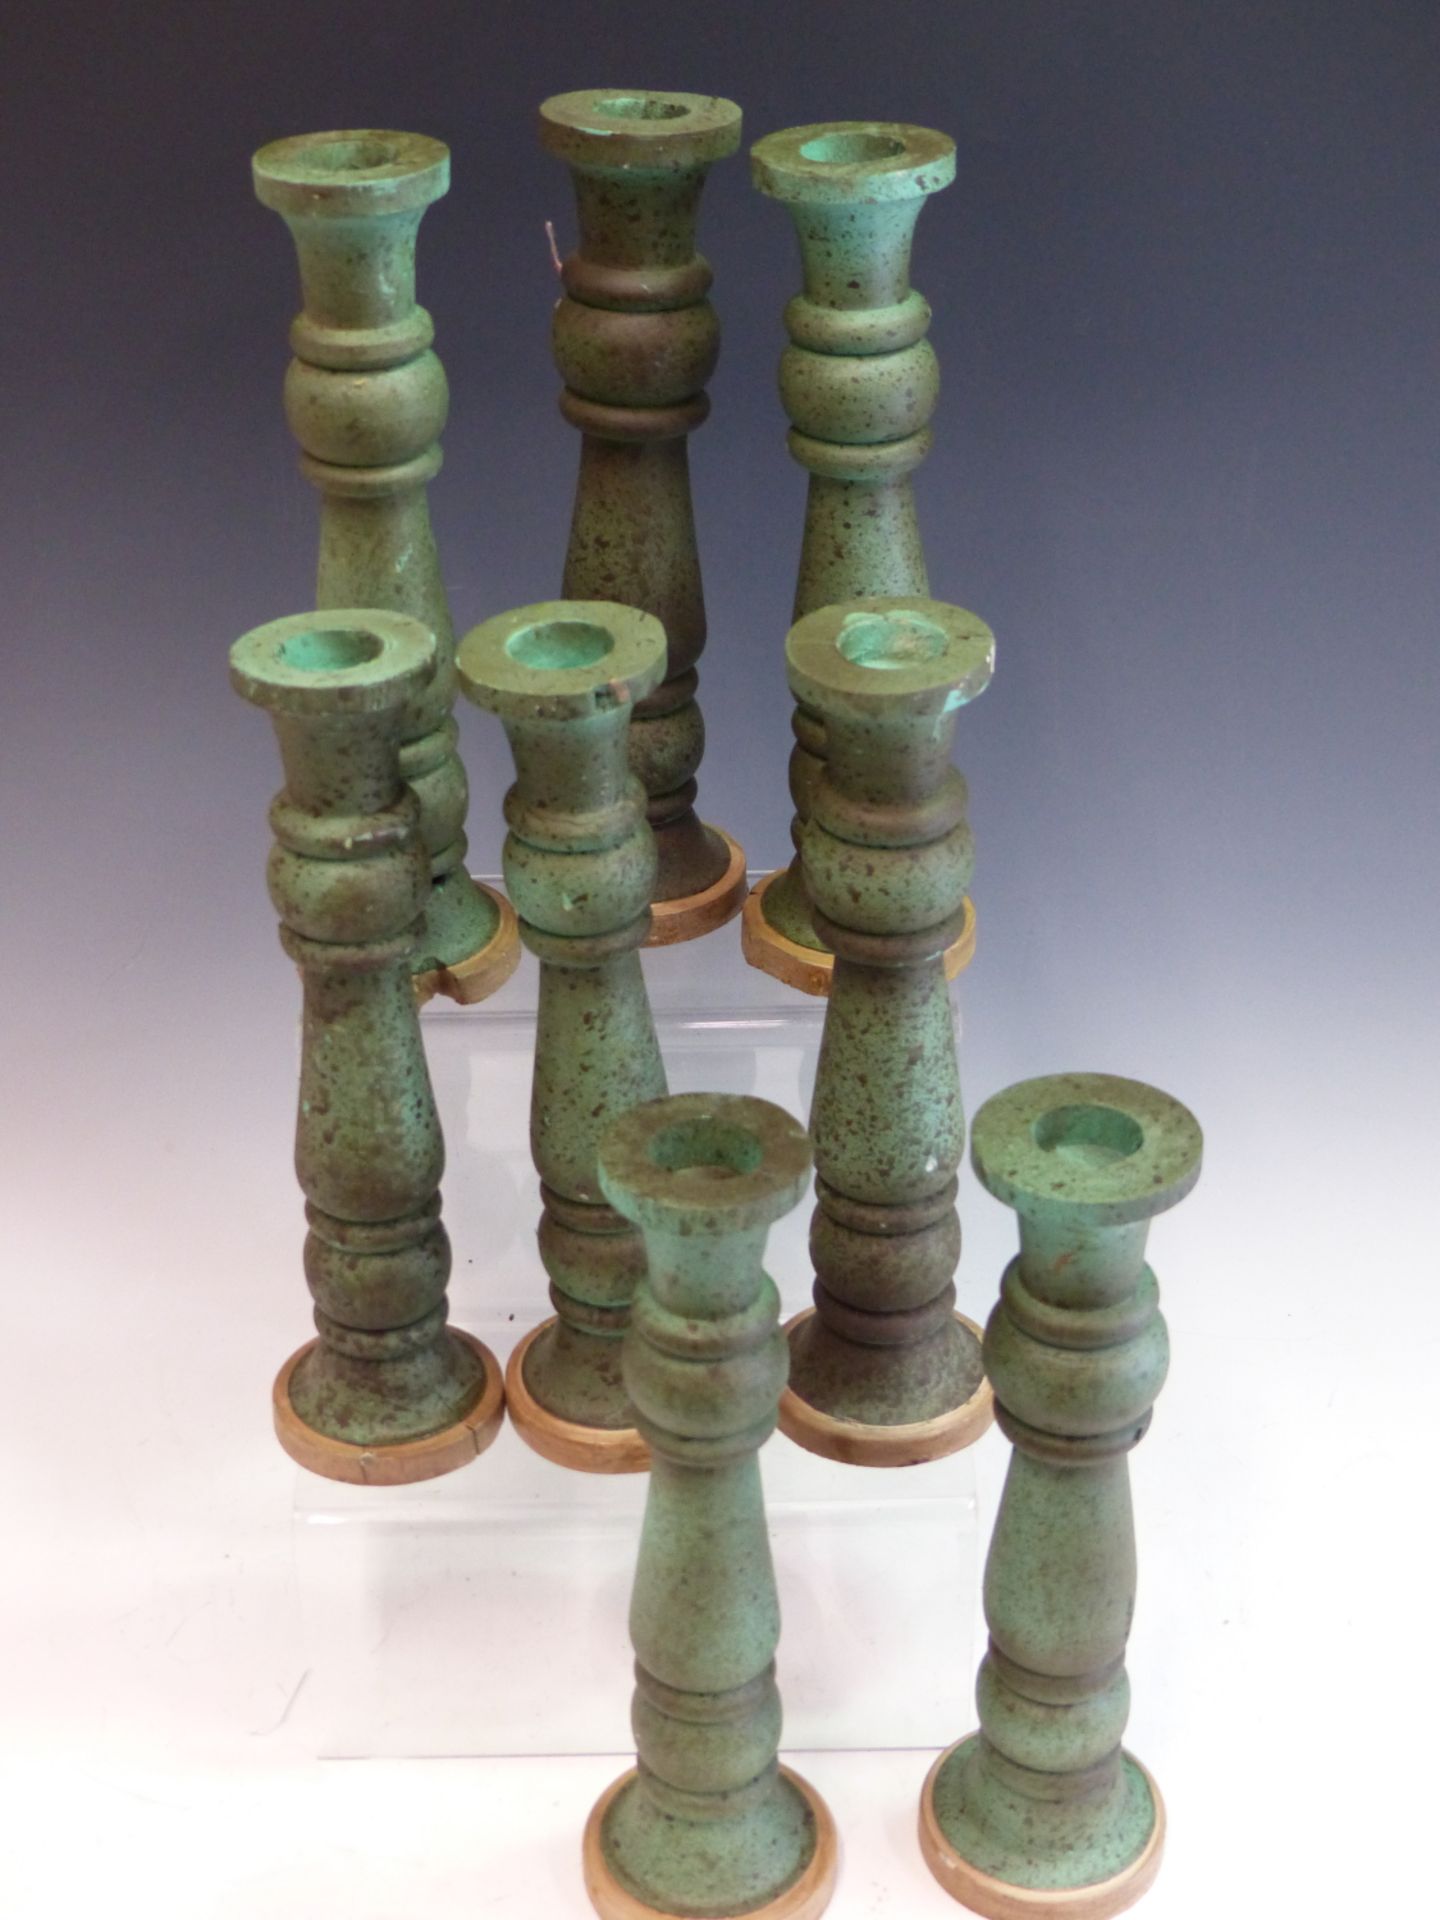 A SET OF EIGHT TURNED WOOD CANDLESTICKS WITH BIRDS EGG BLUE PAINTED DECORATION. - Image 3 of 3